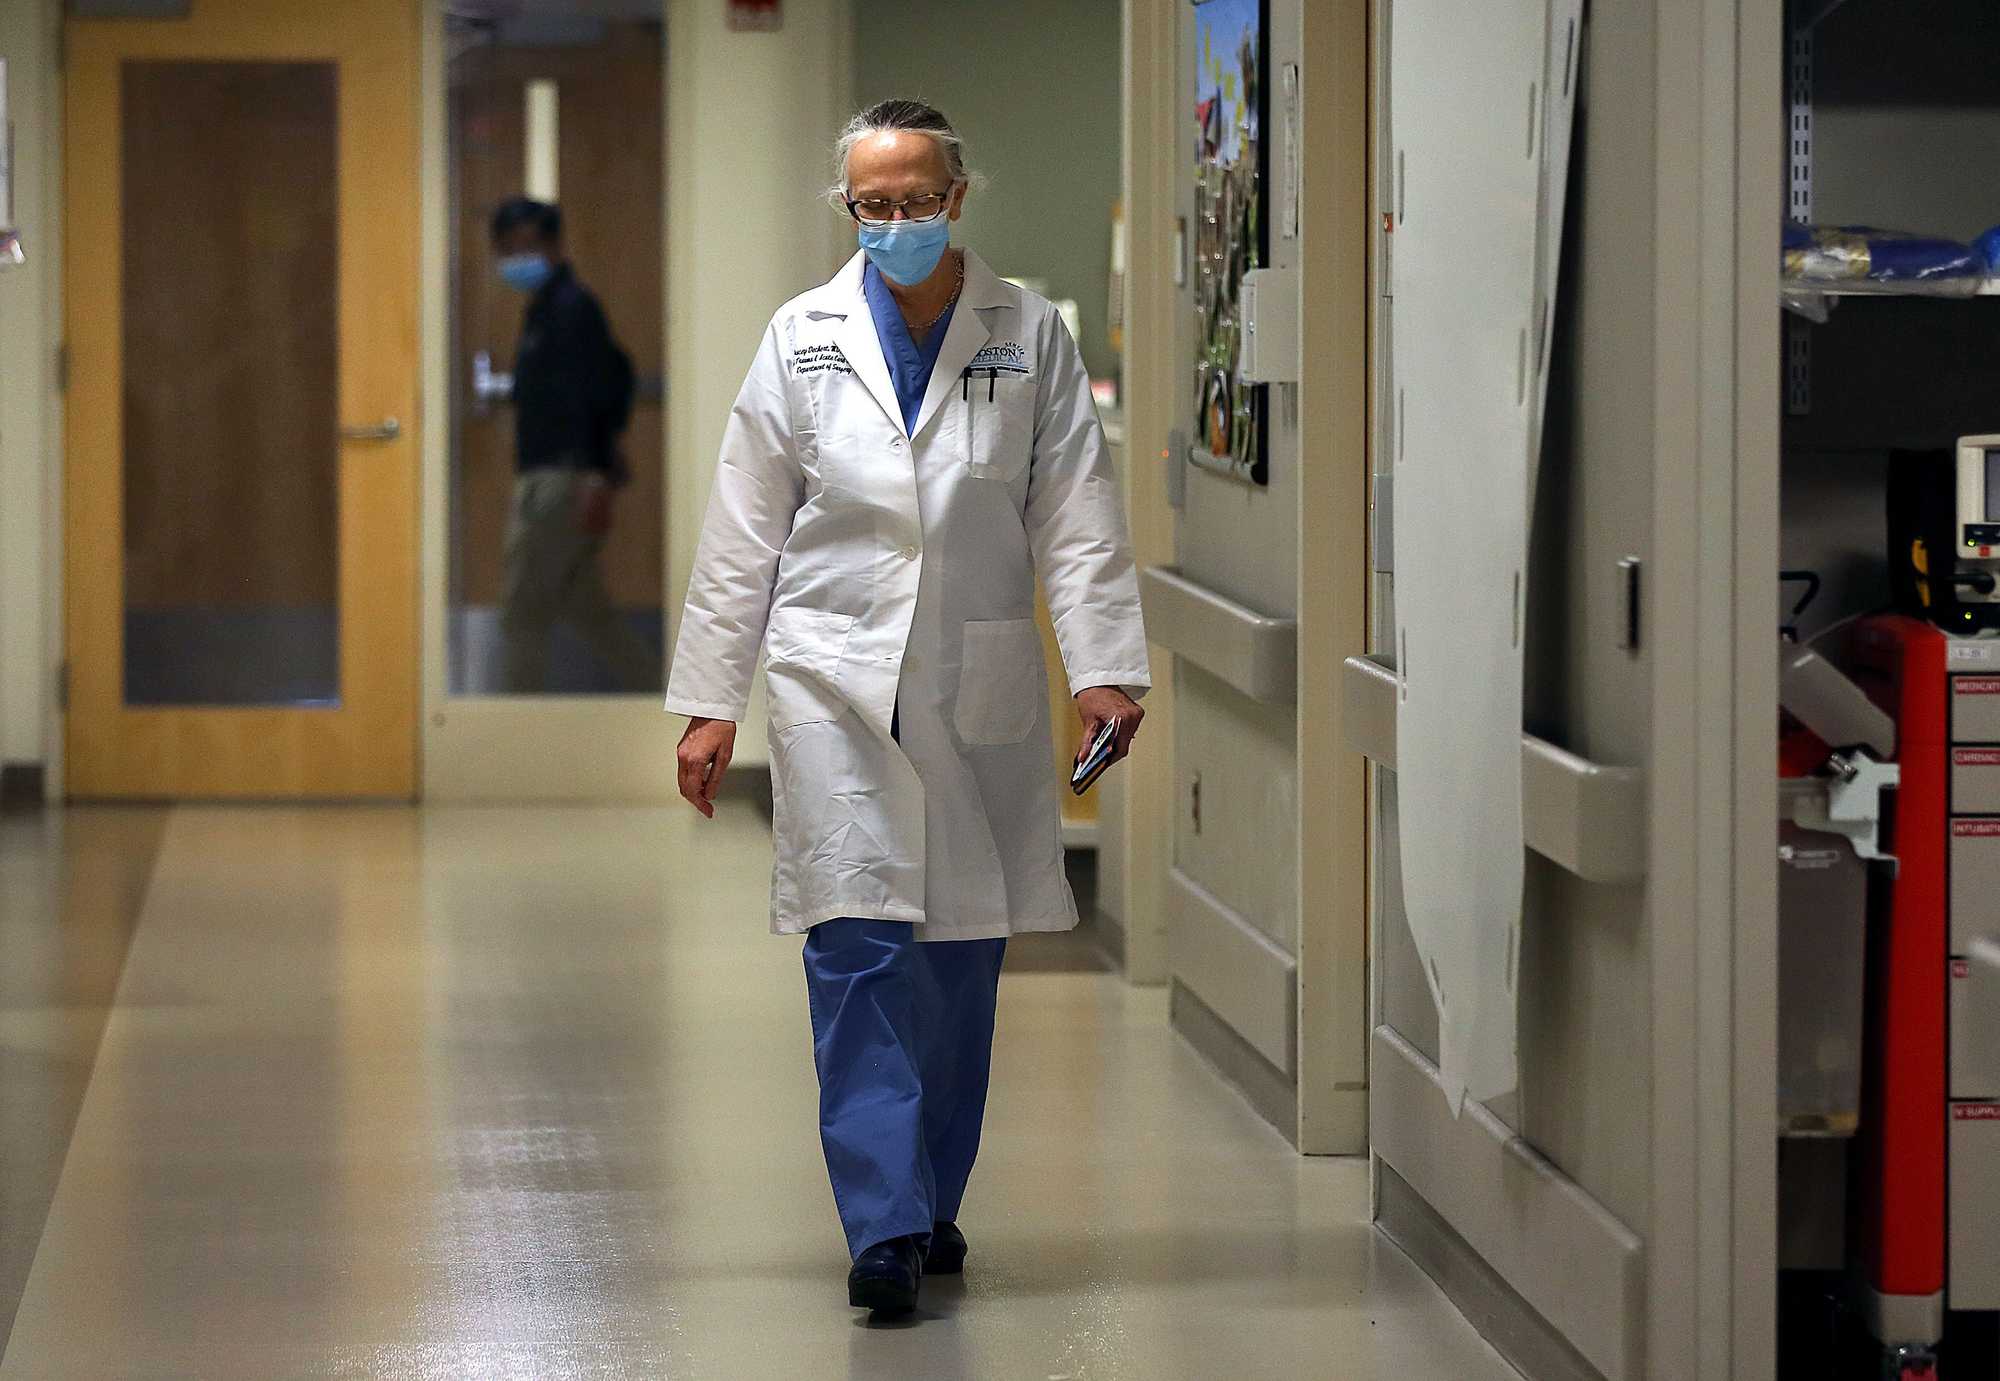 Dr. Tracey Dechert walked along the hallway at the Surgical Intensive Care Unit at Boston Medical Center. 